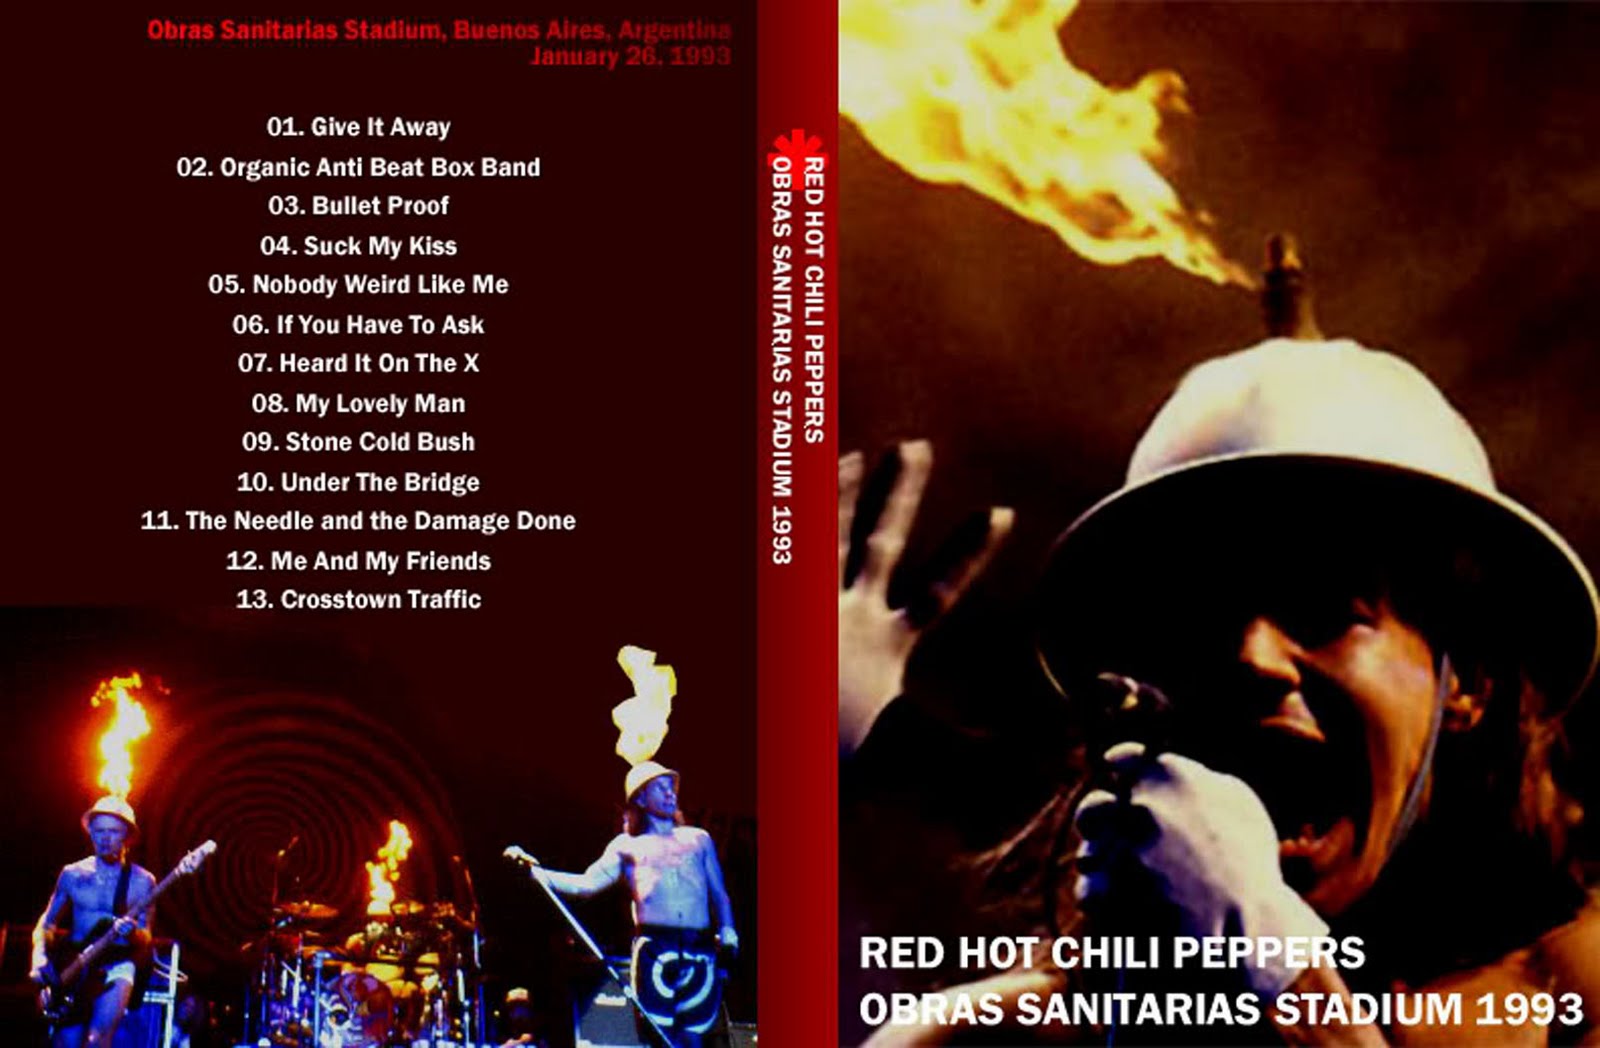 Red Hot Chili Peppers - Images Colection